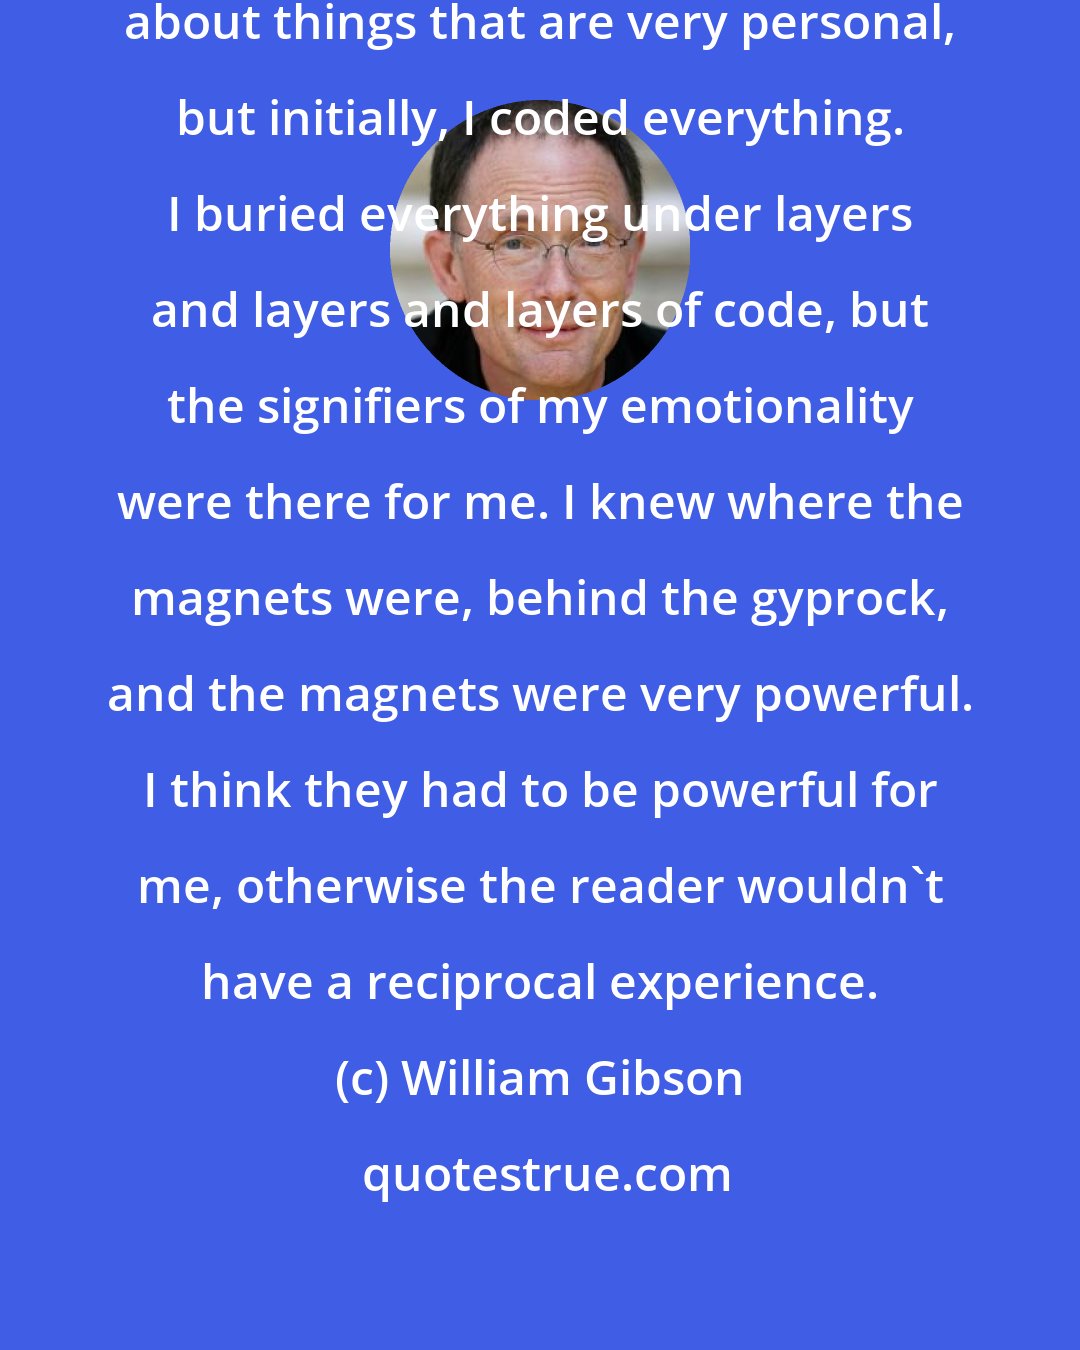 William Gibson: I think that I've always written about things that are very personal, but initially, I coded everything. I buried everything under layers and layers and layers of code, but the signifiers of my emotionality were there for me. I knew where the magnets were, behind the gyprock, and the magnets were very powerful. I think they had to be powerful for me, otherwise the reader wouldn't have a reciprocal experience.